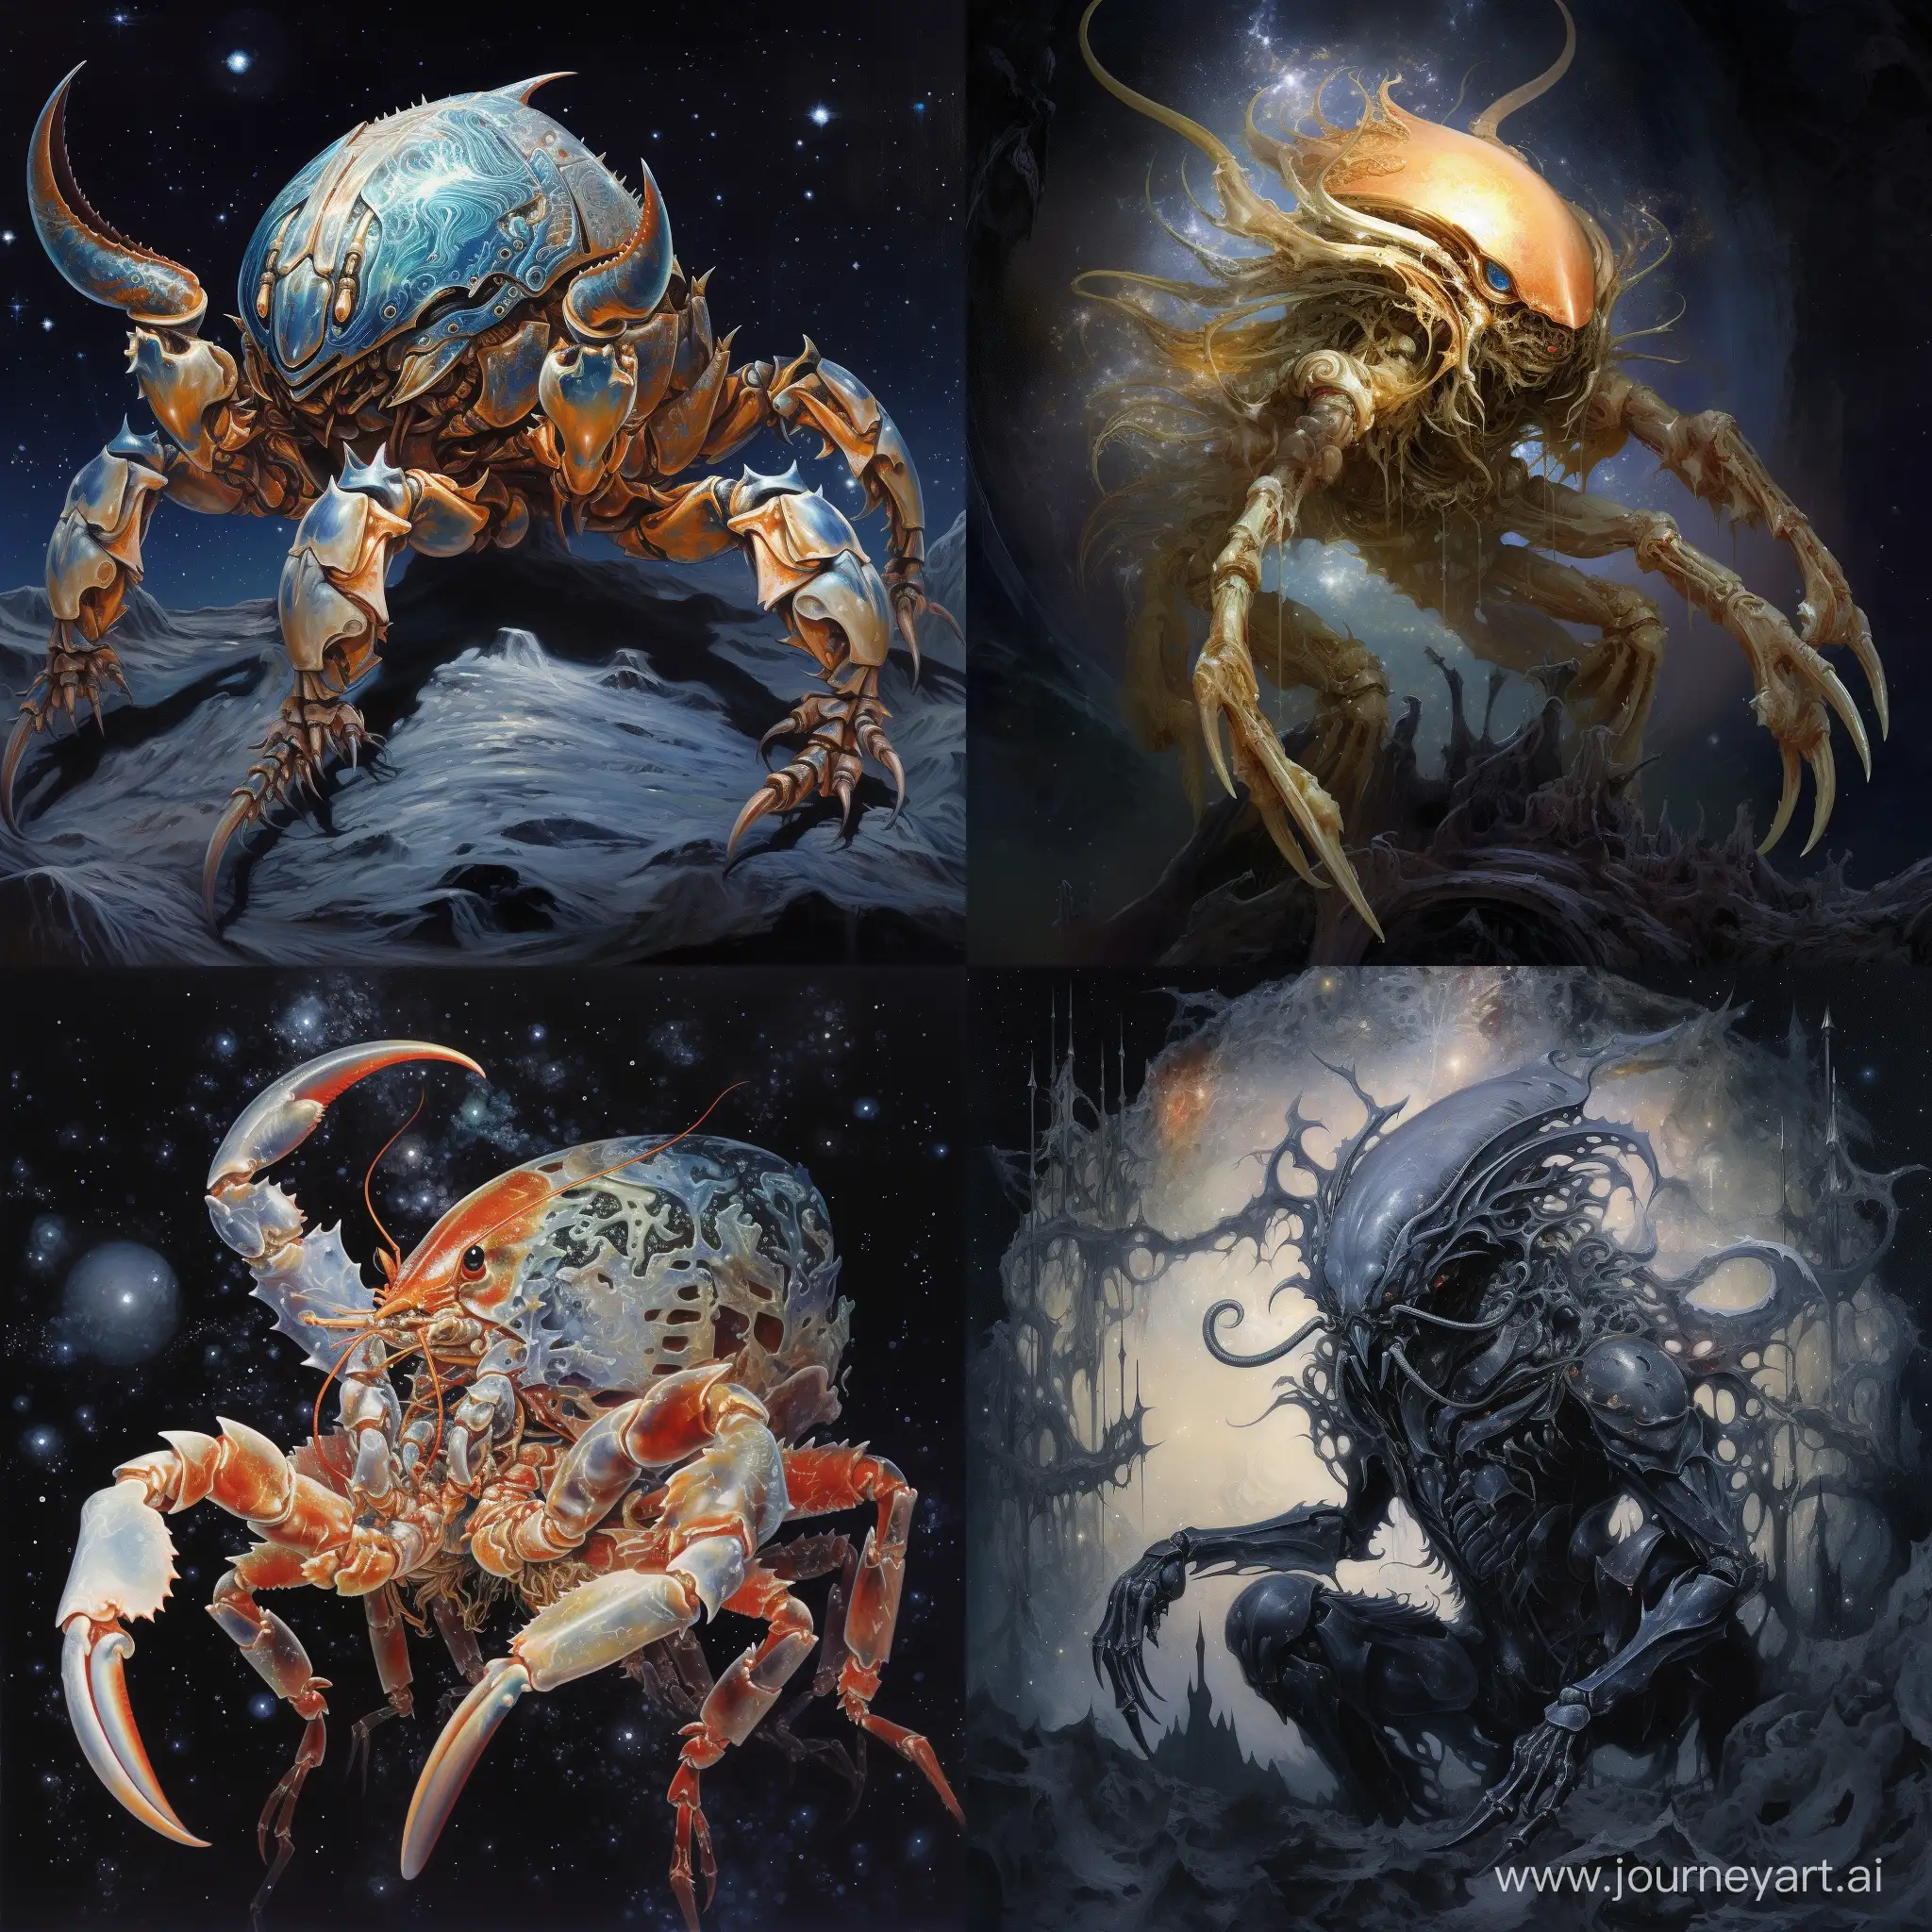 Scorpion, dwelling within the depths of the twelfth house, its form cloaked in shadows and mystery, surrounded by swirling cosmic energies, its gaze intense and penetrating, a sense of hidden power and transformation, set against a backdrop of ethereal nebulas and distant galaxies, revealing the profound and enigmatic nature of the subconscious mind